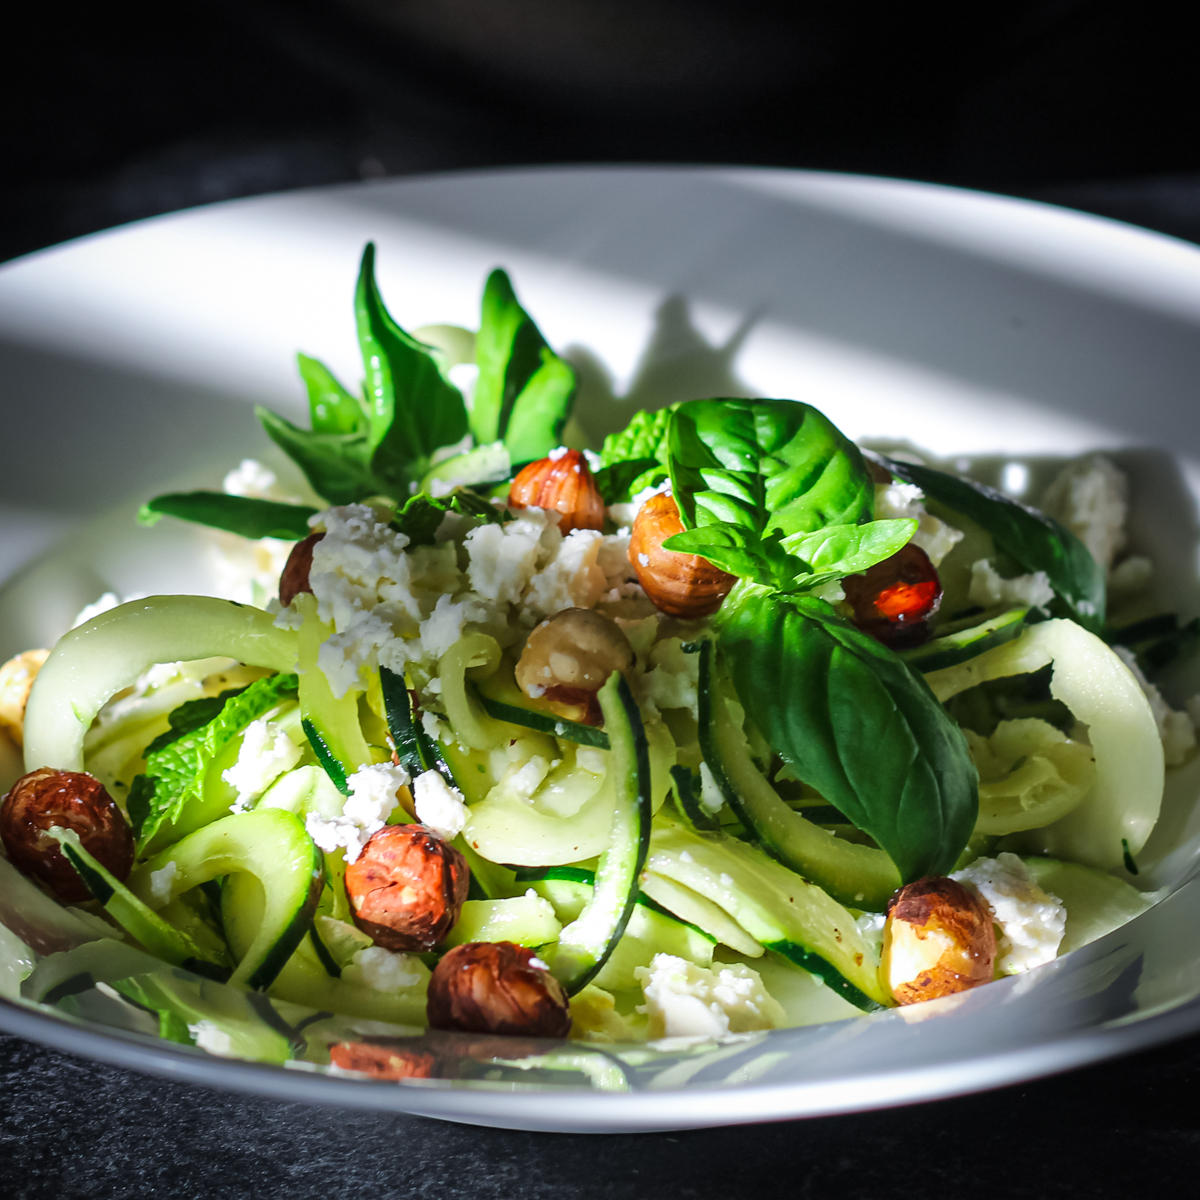 Raw zucchini feta salad with hazelnuts and basil leaves in a white bowl with shadow cast diagonally across.